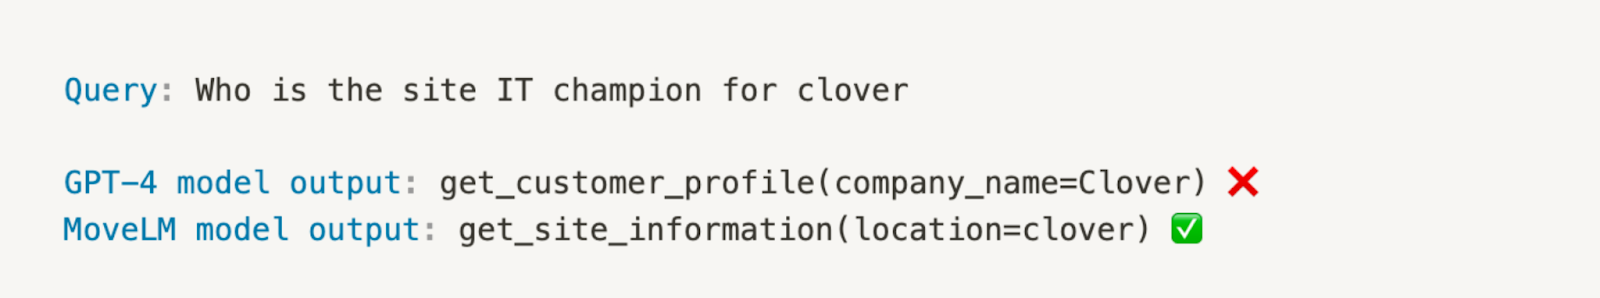 query who is the site it champion for clover